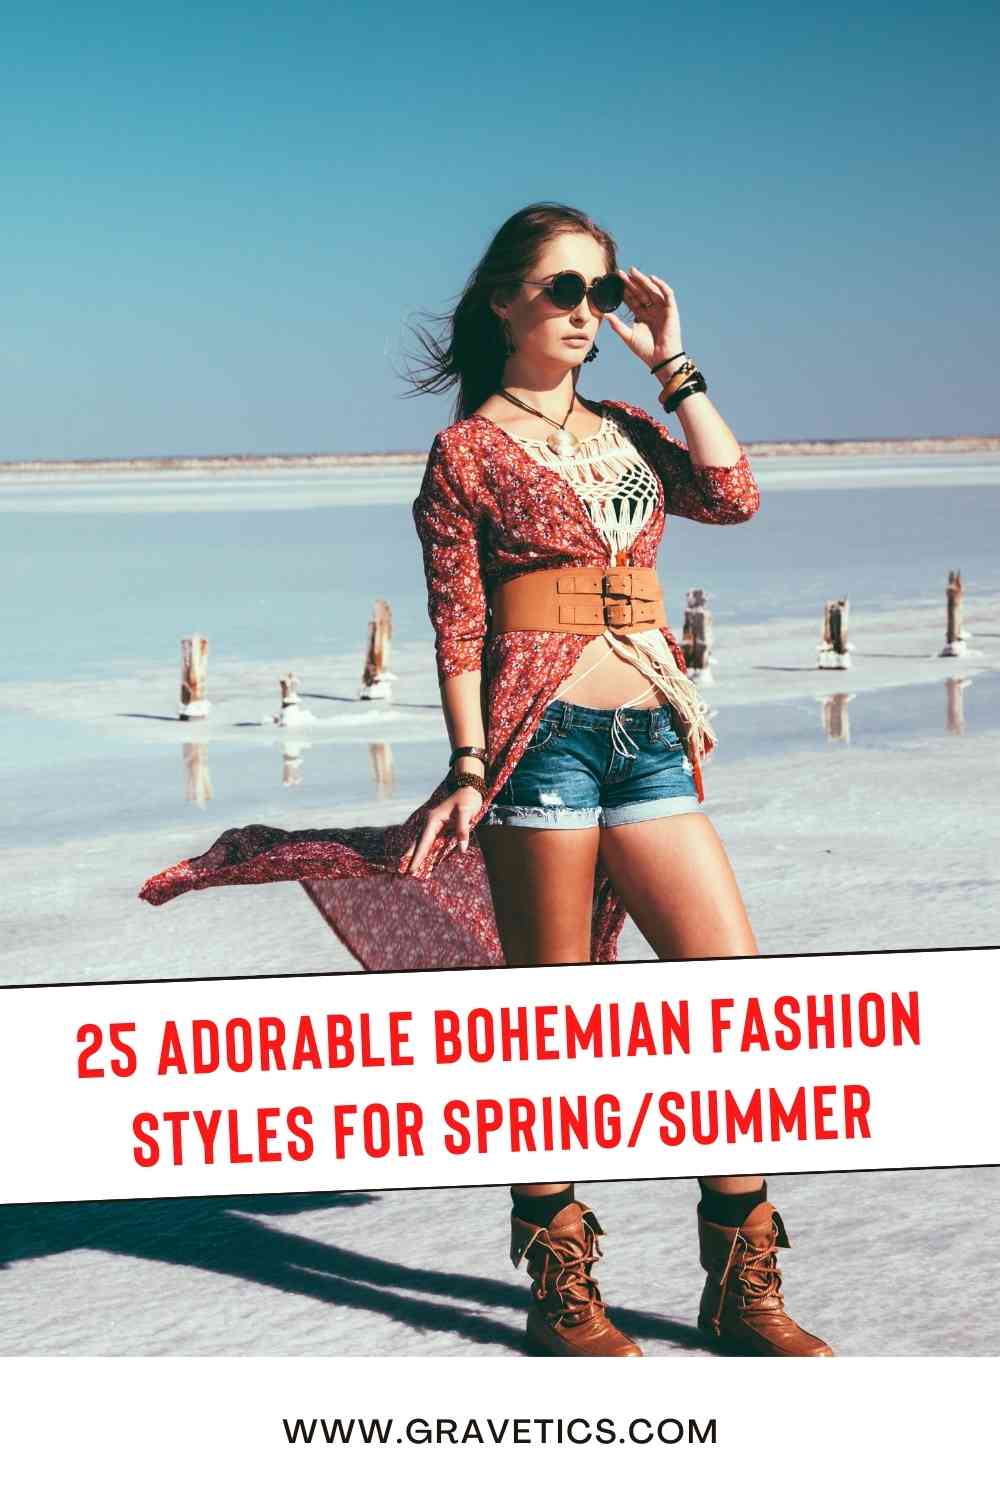 25 Adorable Bohemian Fashion Styles For Spring/Summer